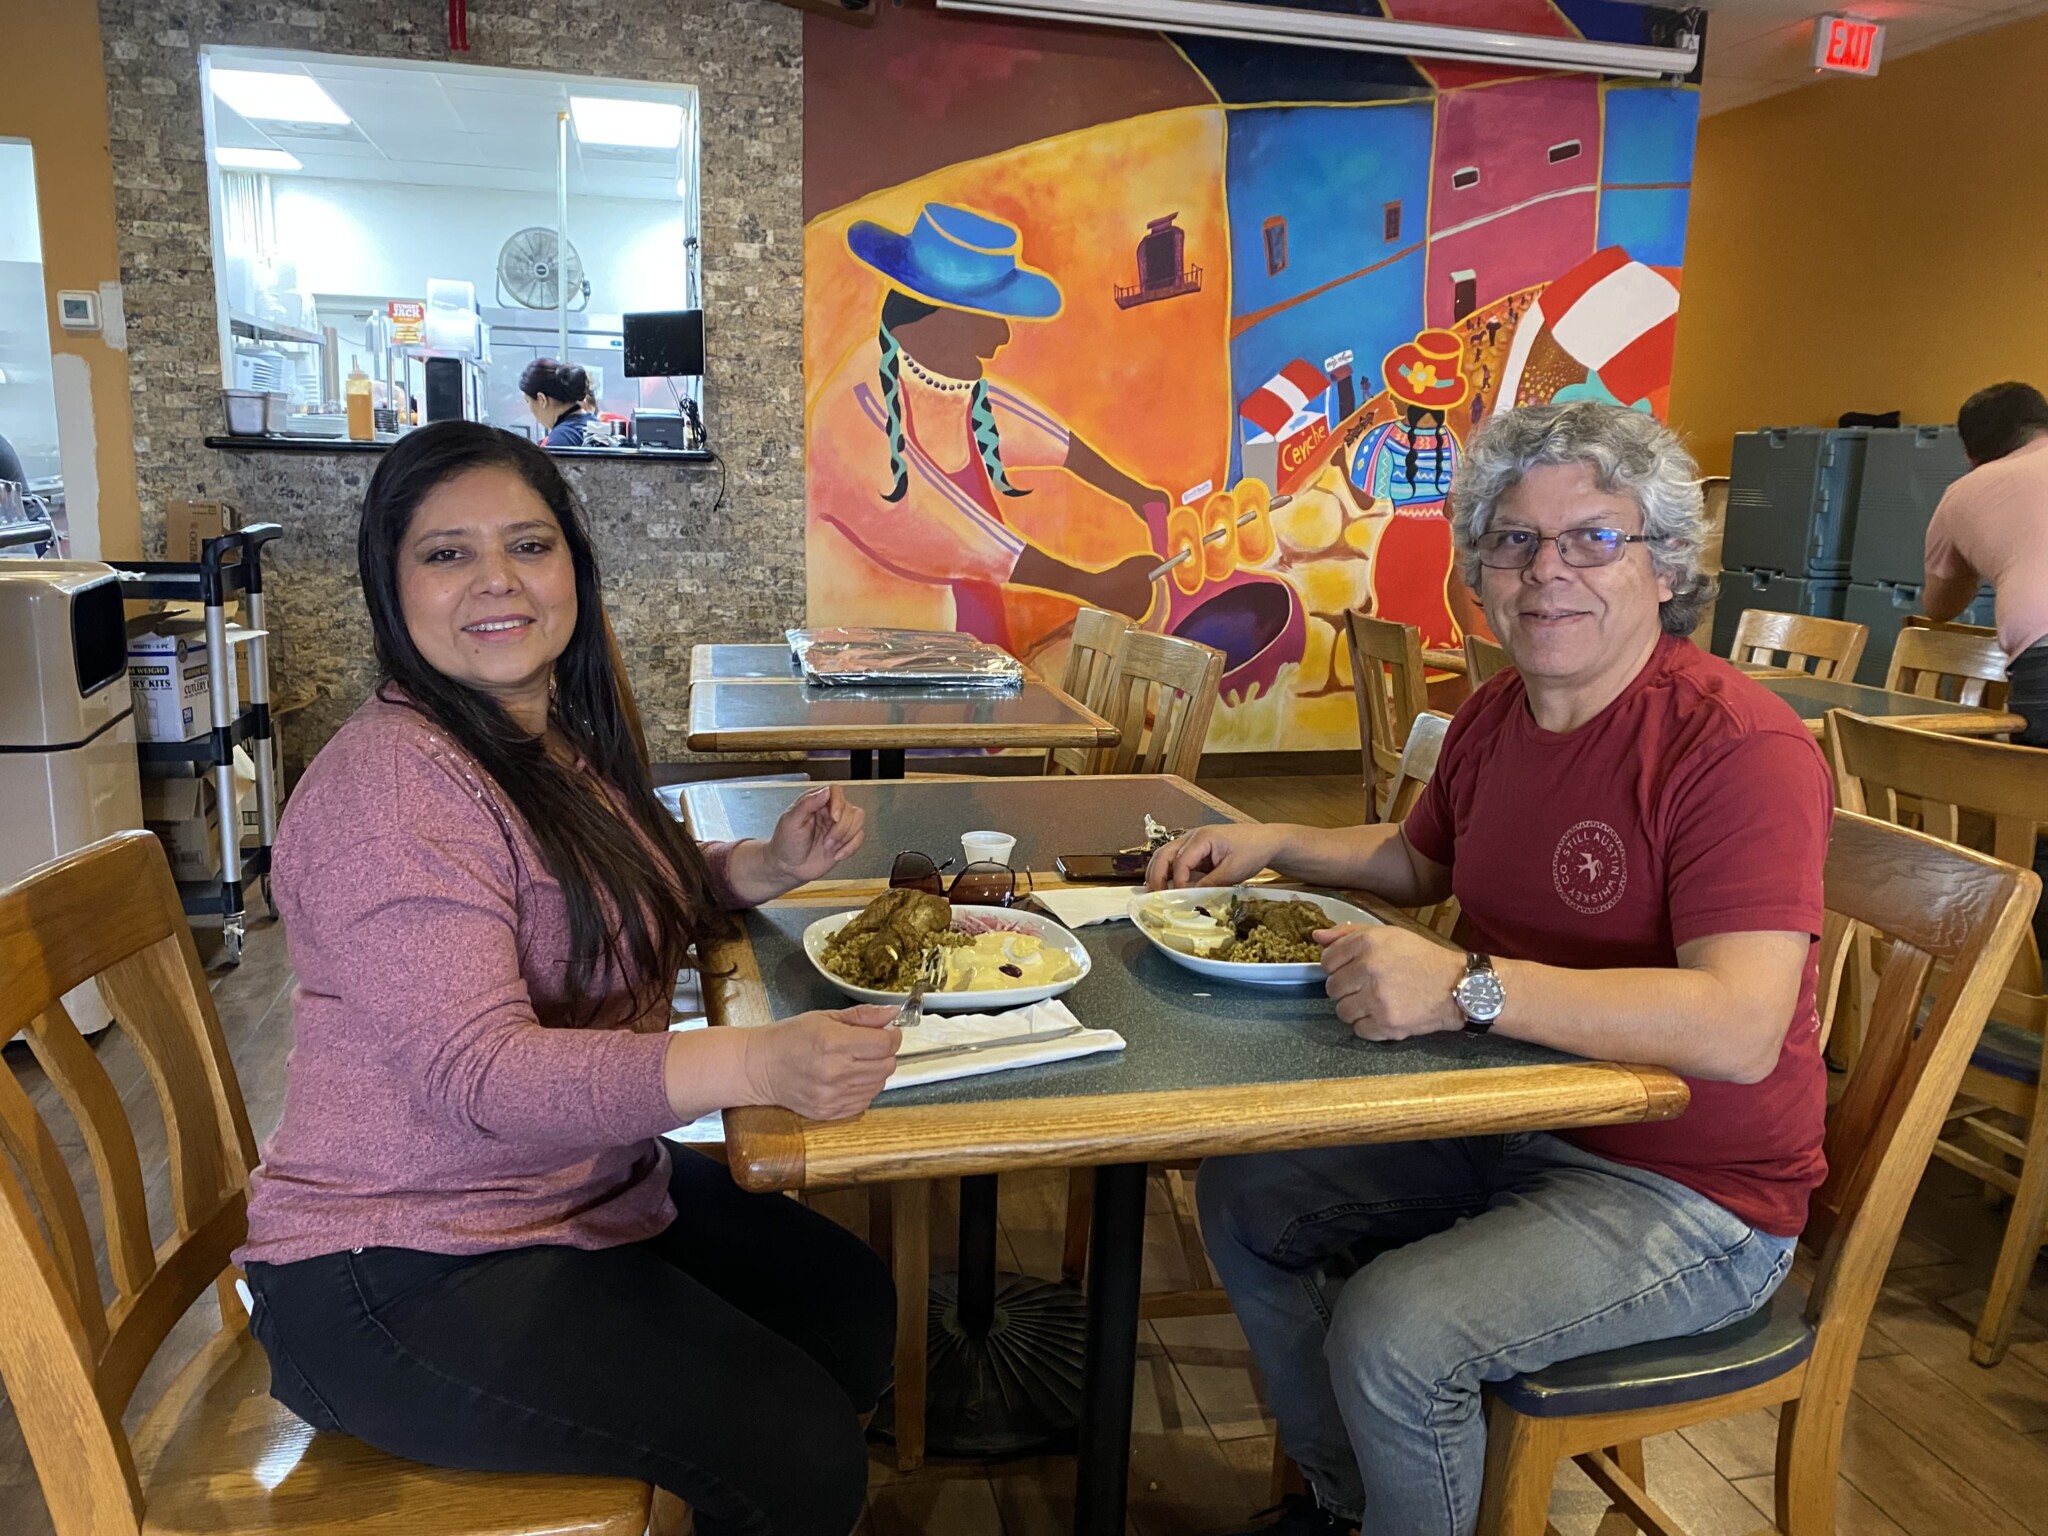 A Latino man and woman sit at a restaurant table, with plates of food in front of them and a colorful mural in the background.